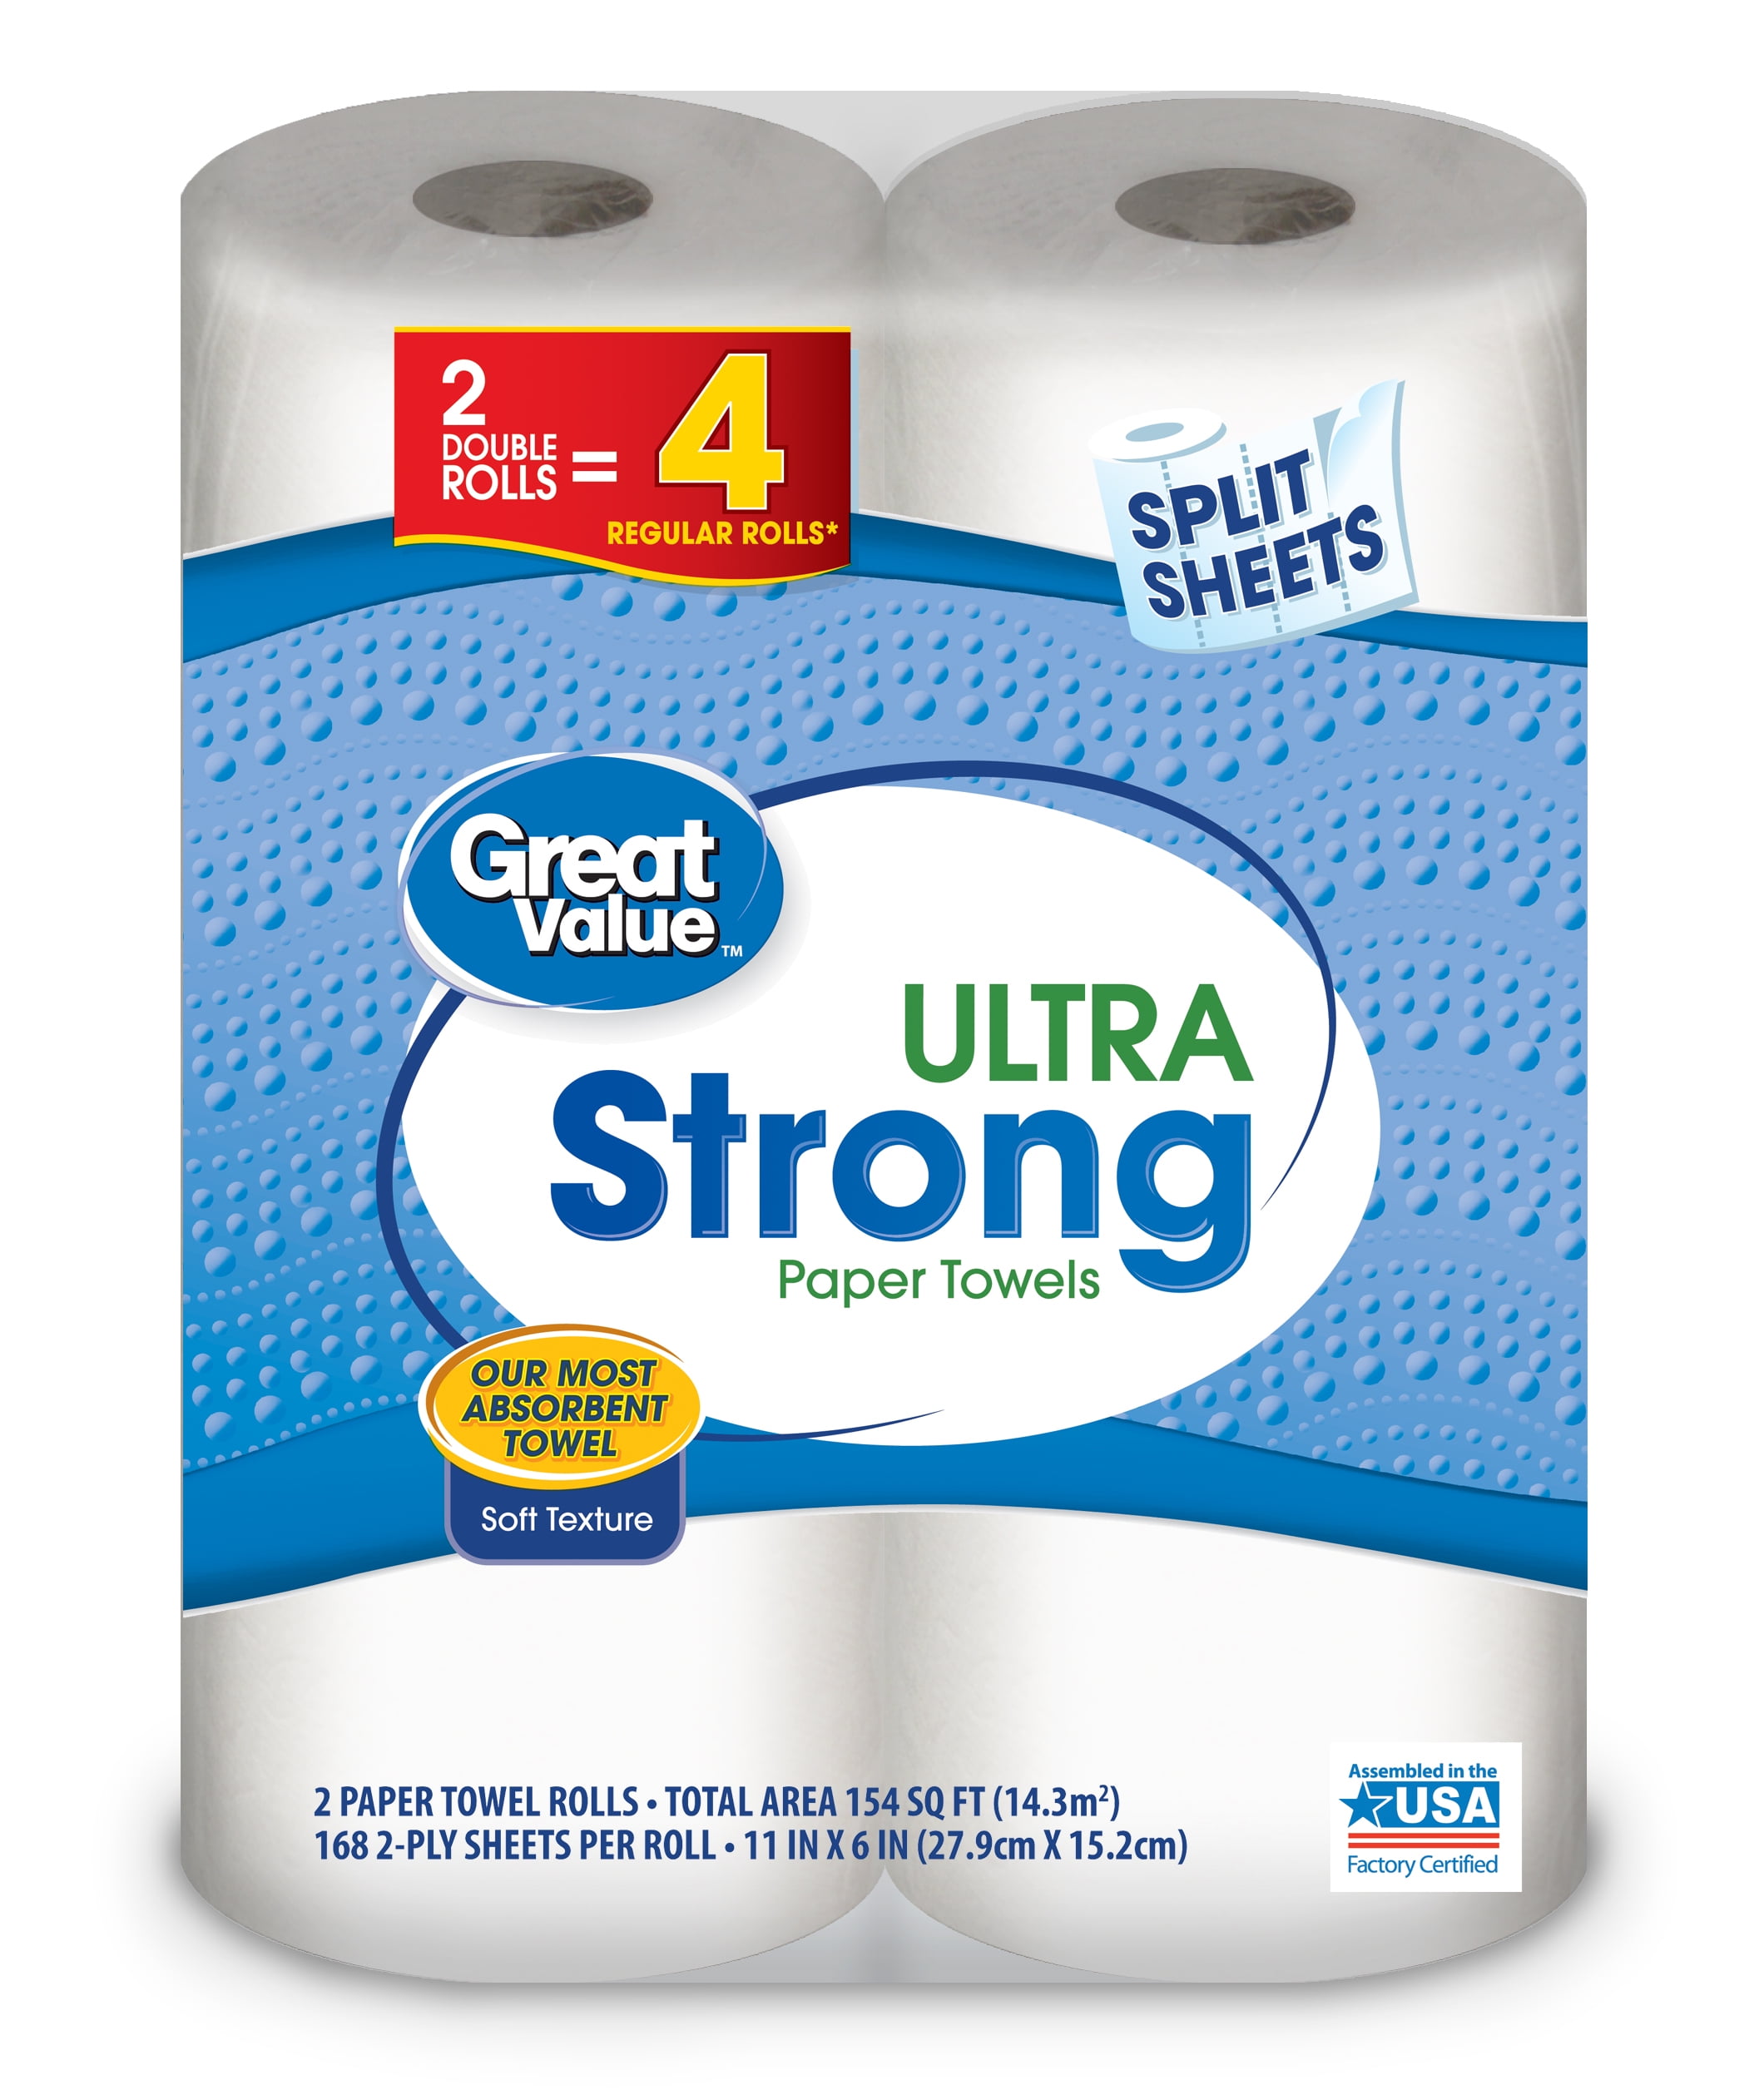 great-value-paper-towels-ultra-strong-2-count-walmart